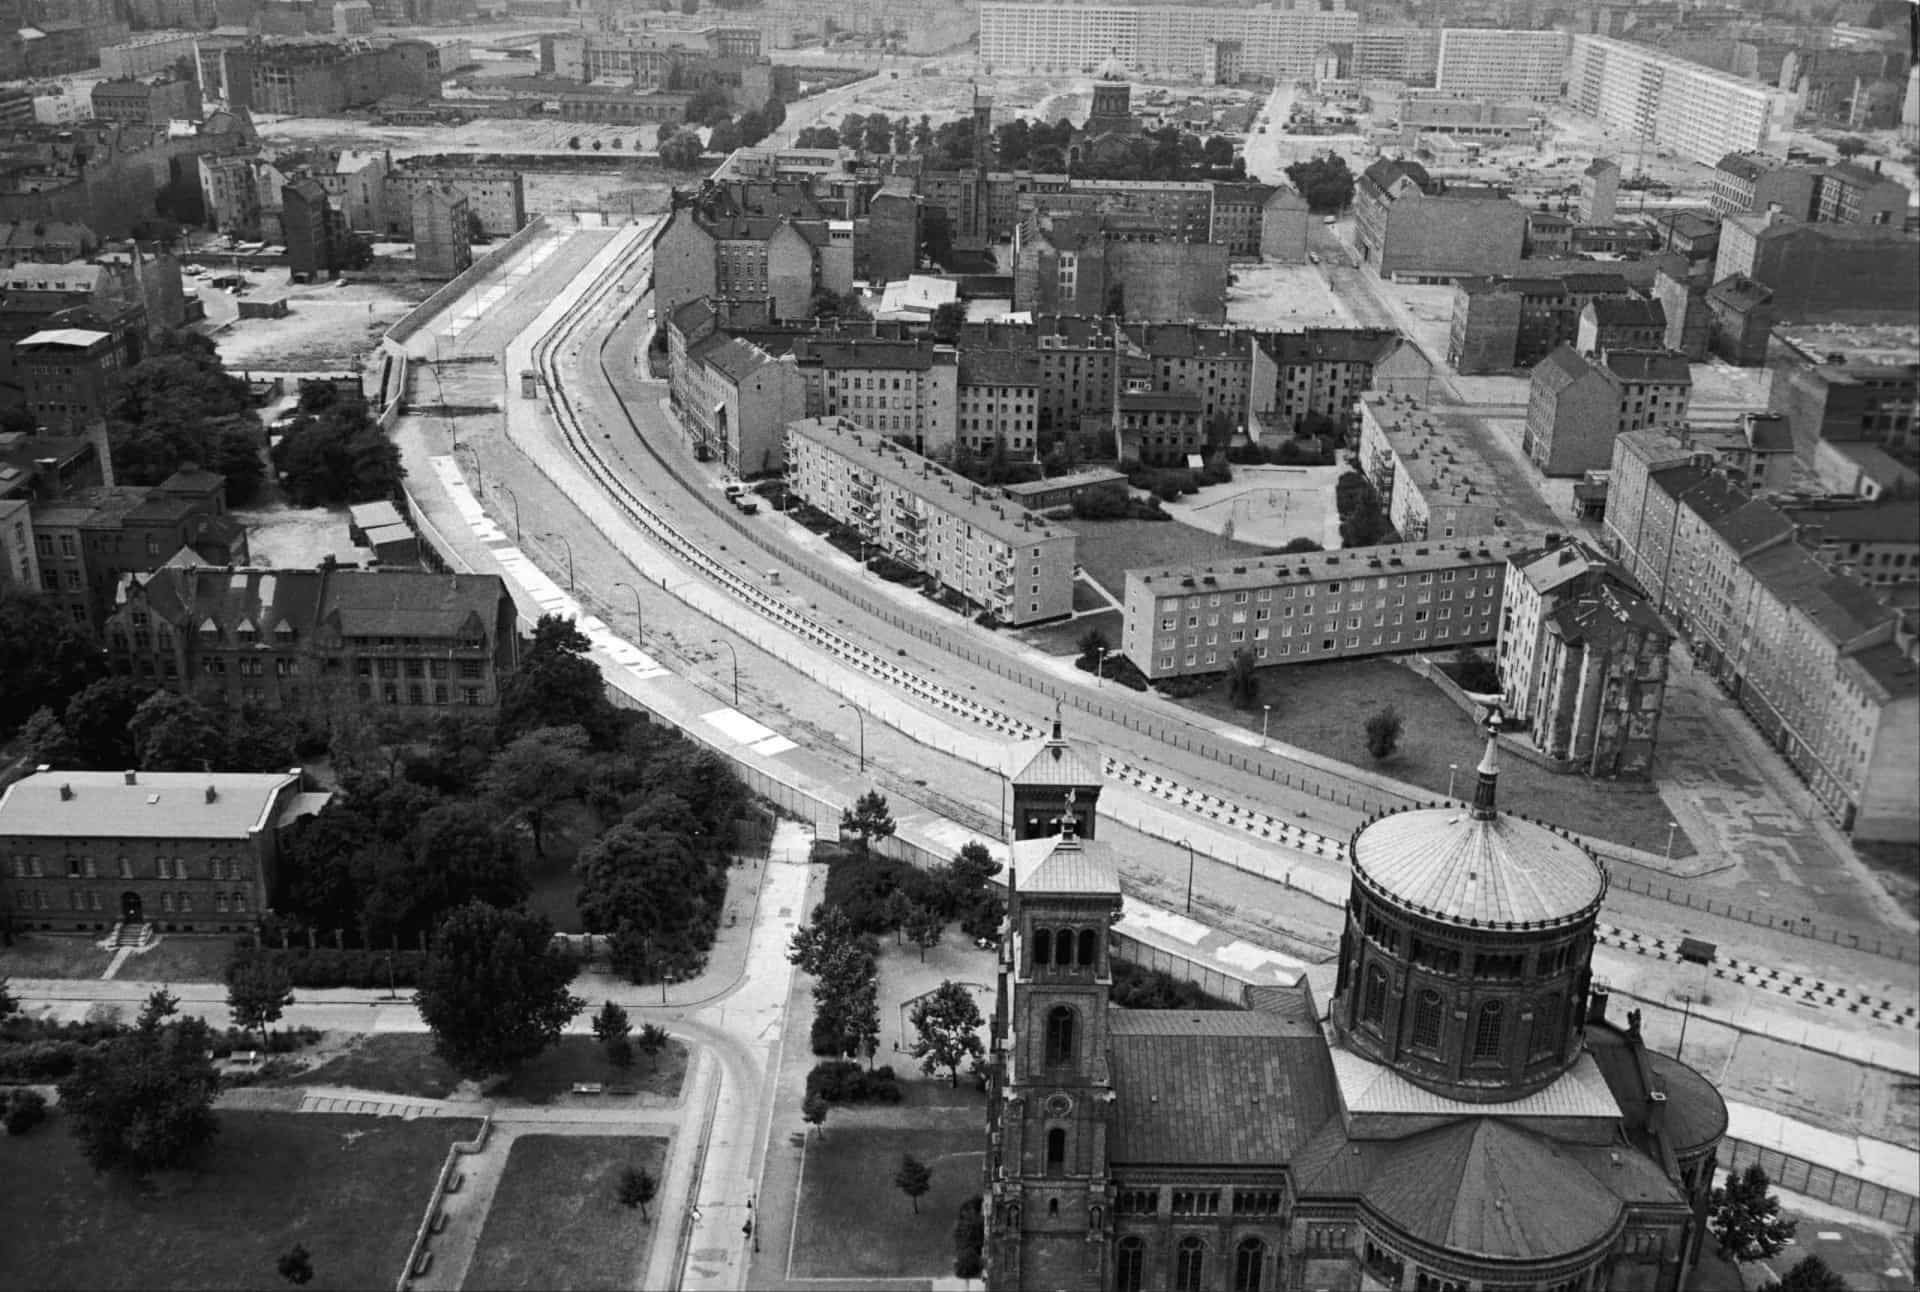 <p>The divided city seen from the air. On the right of the wall is East Berlin. On the left, West Berlin.</p><p>You may also like: <a href="https://www.starsinsider.com/n/496252?utm_source=msn.com&utm_medium=display&utm_campaign=referral_description&utm_content=509600en-us">Read the room: Tone-deaf celebrity comments</a></p>